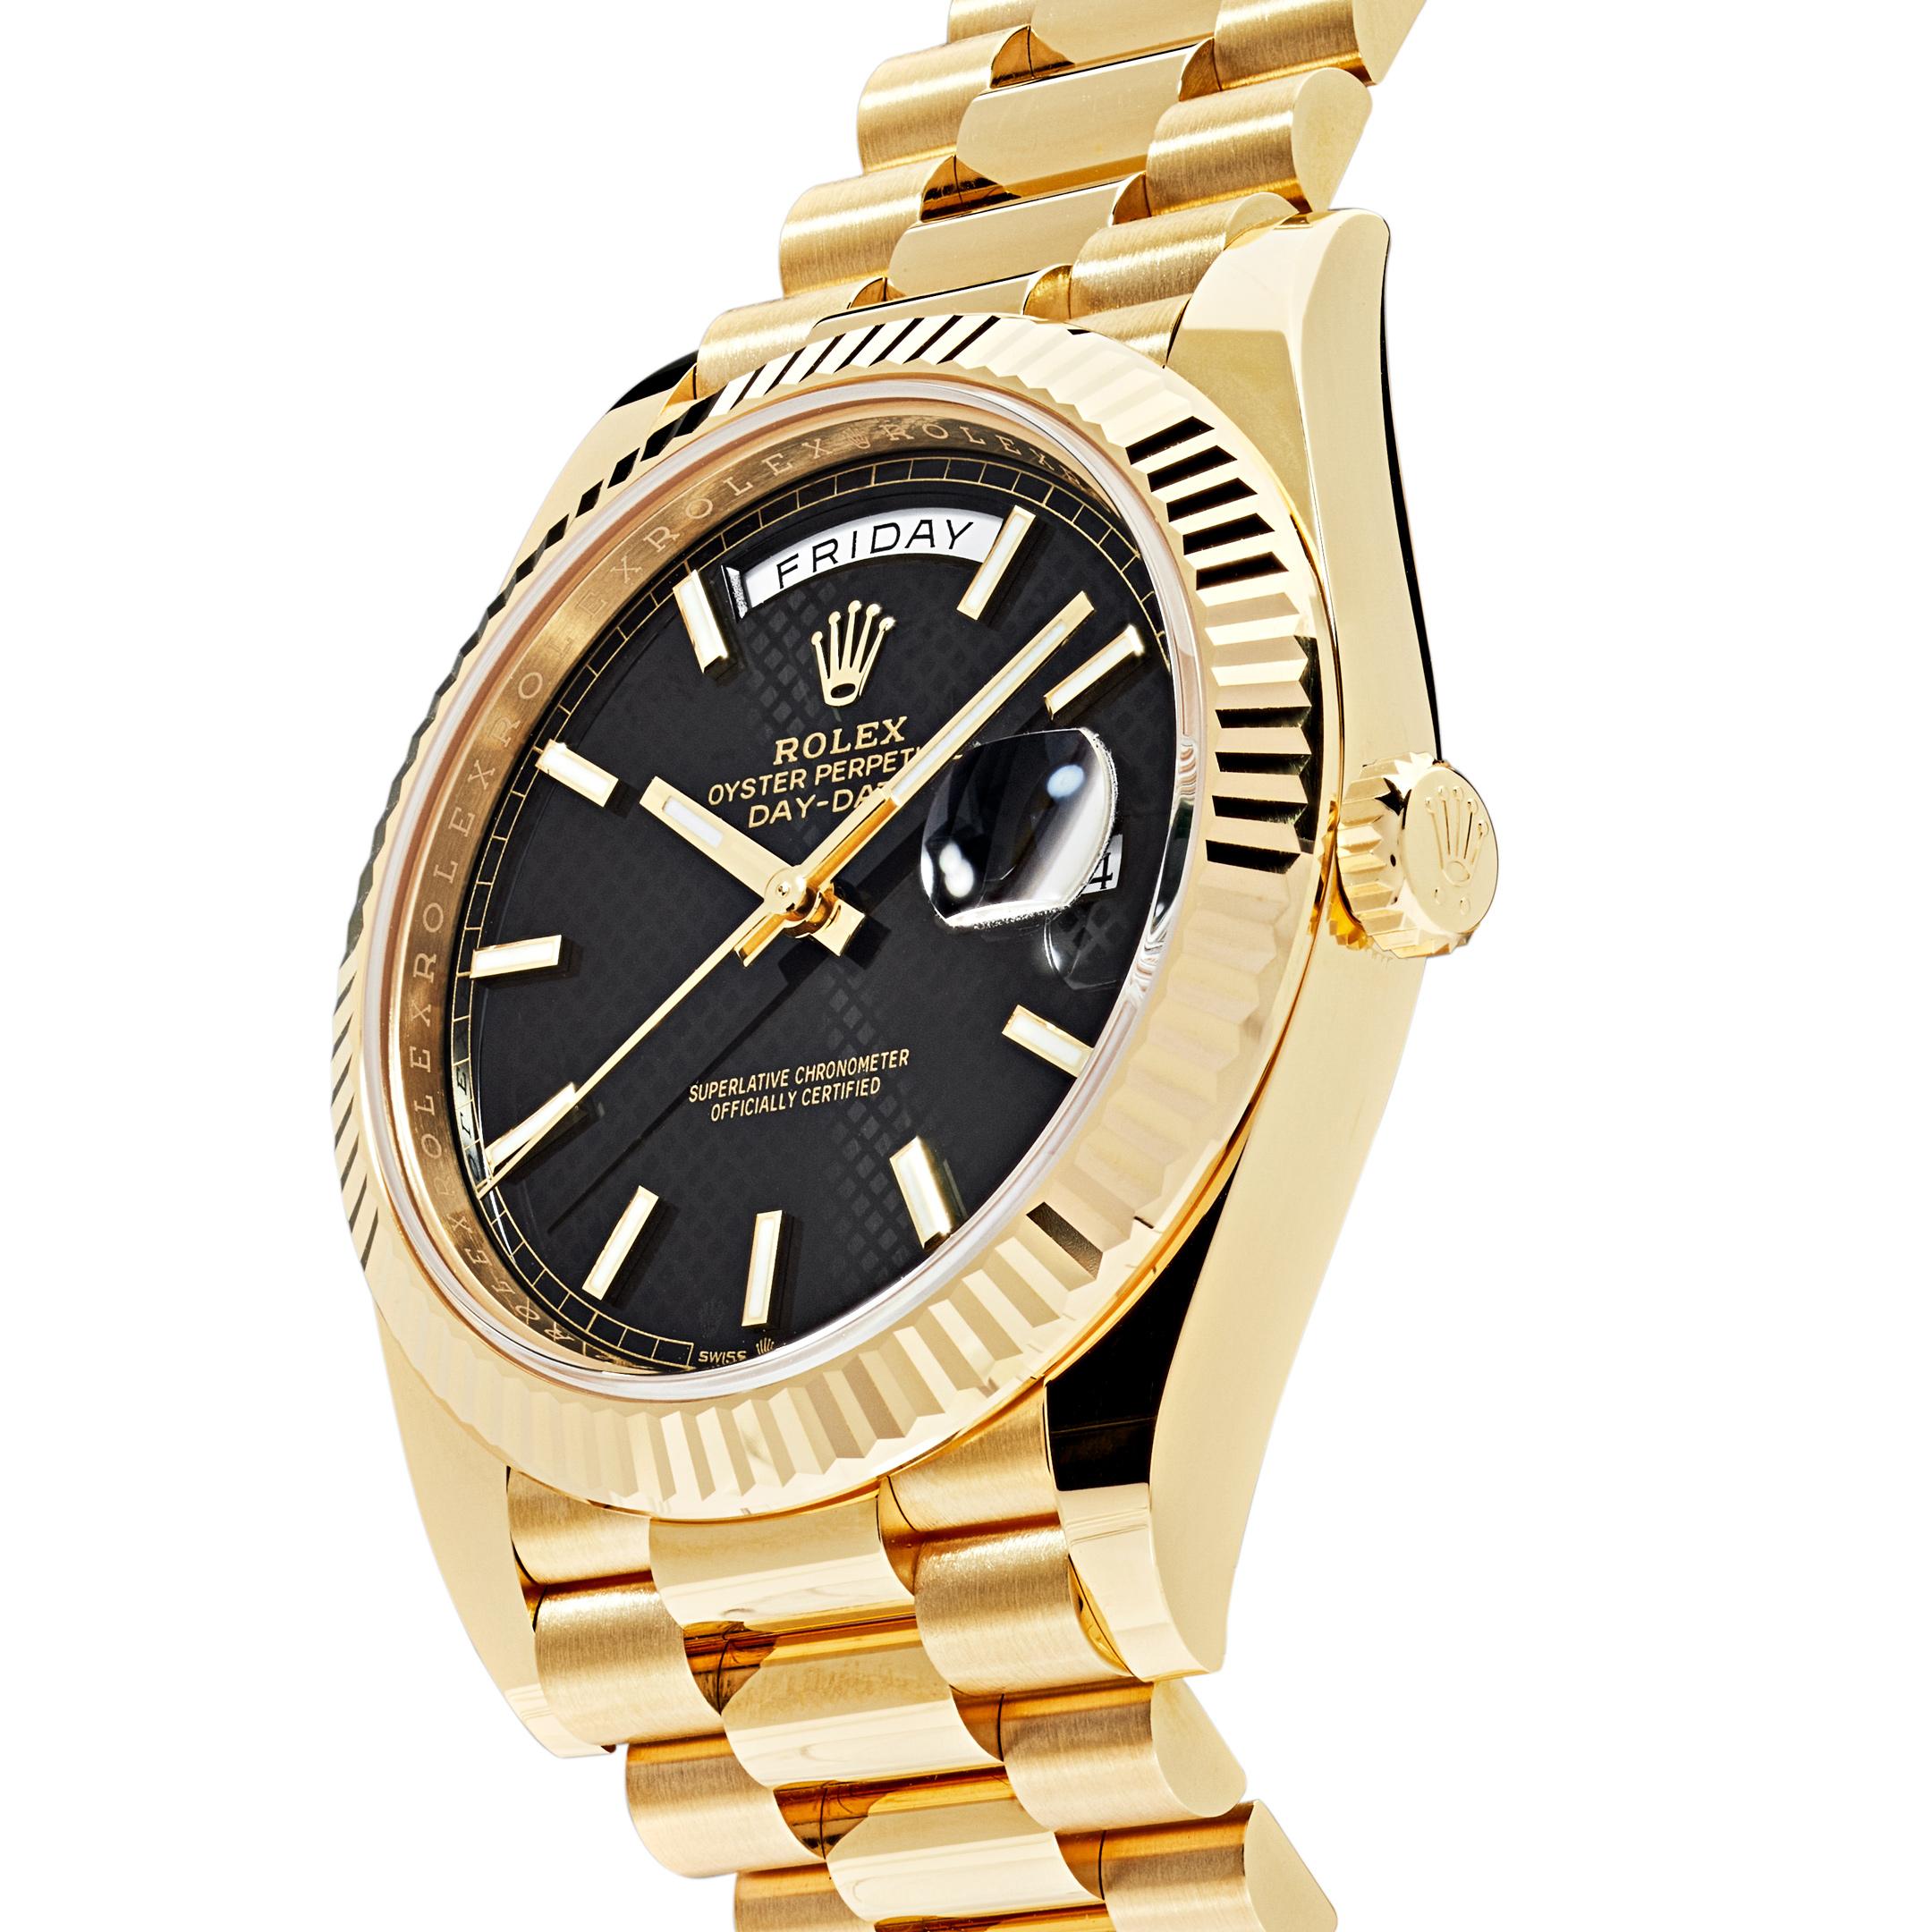 The Oyster Perpetual Day-Date is inlaid in a sophisticated 40mm 18k yellow gold case surrounding a black, diagonal-motif dial with chromalight index markers and hands. The signature fluted bezel is a distinctive feature for the Rolex brand. The